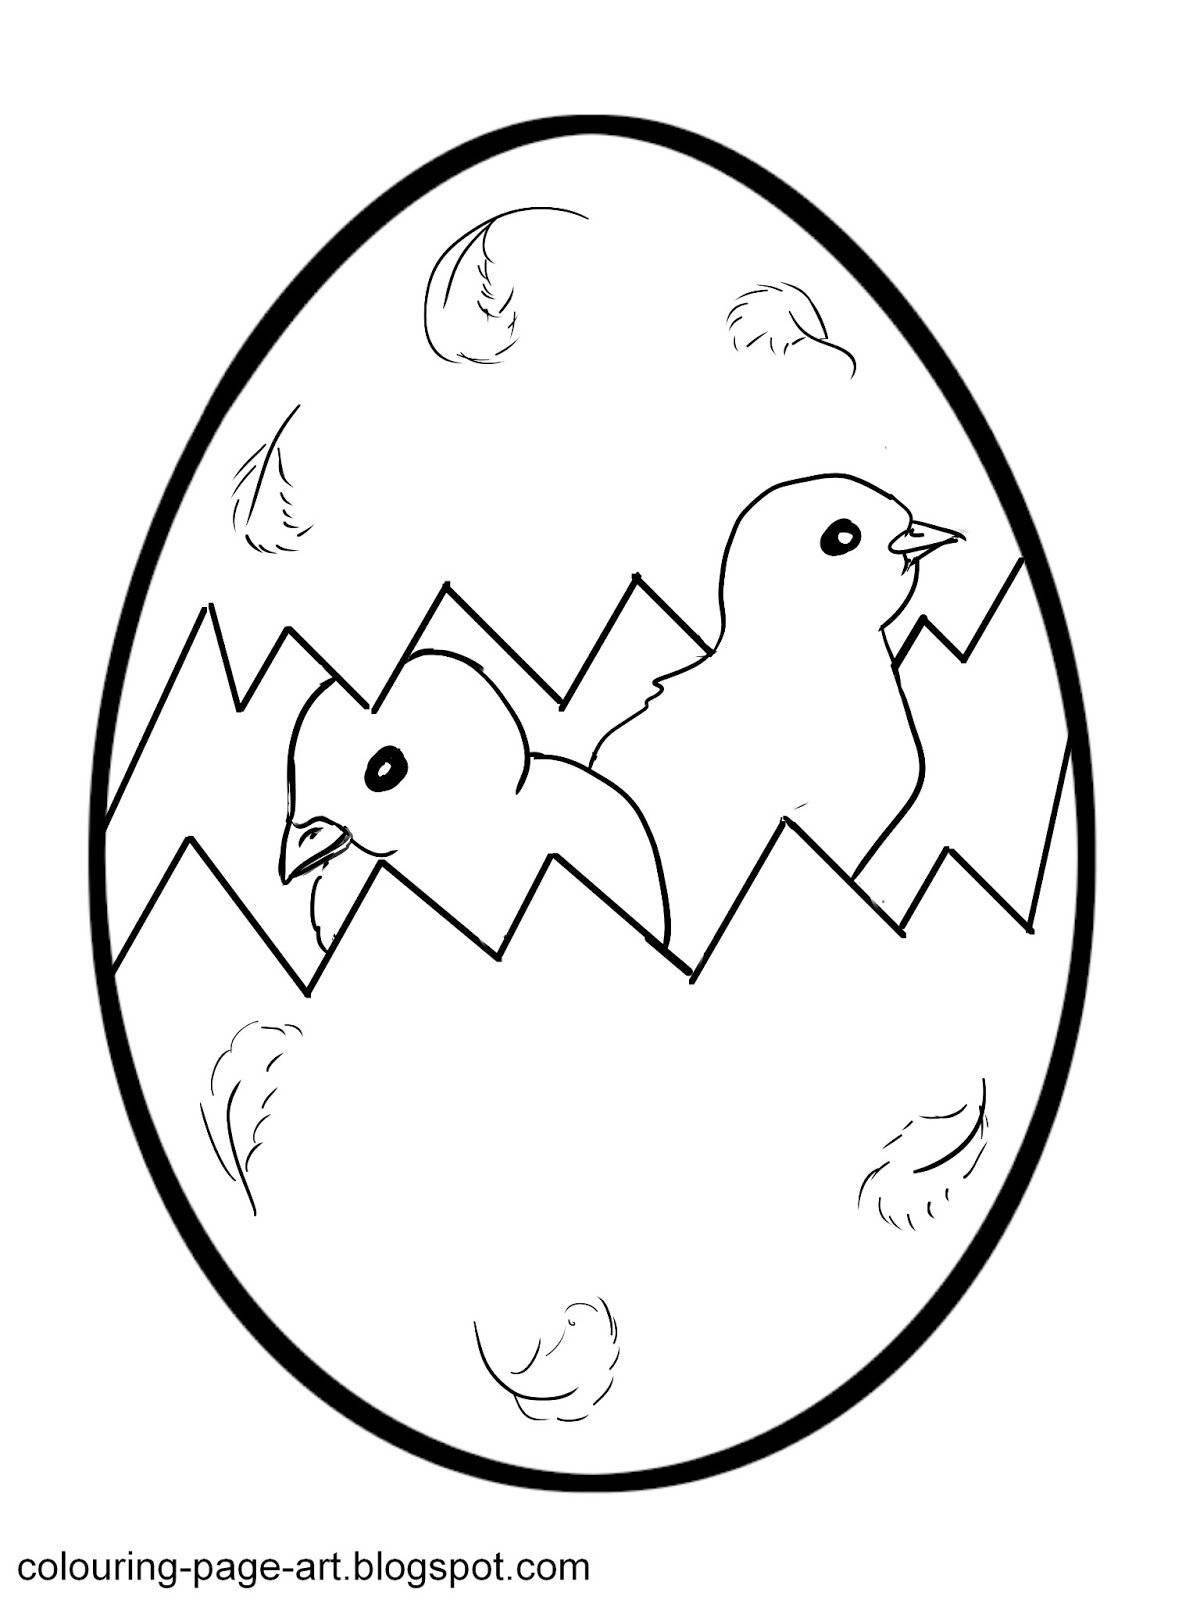 Coloring page tender chick in egg